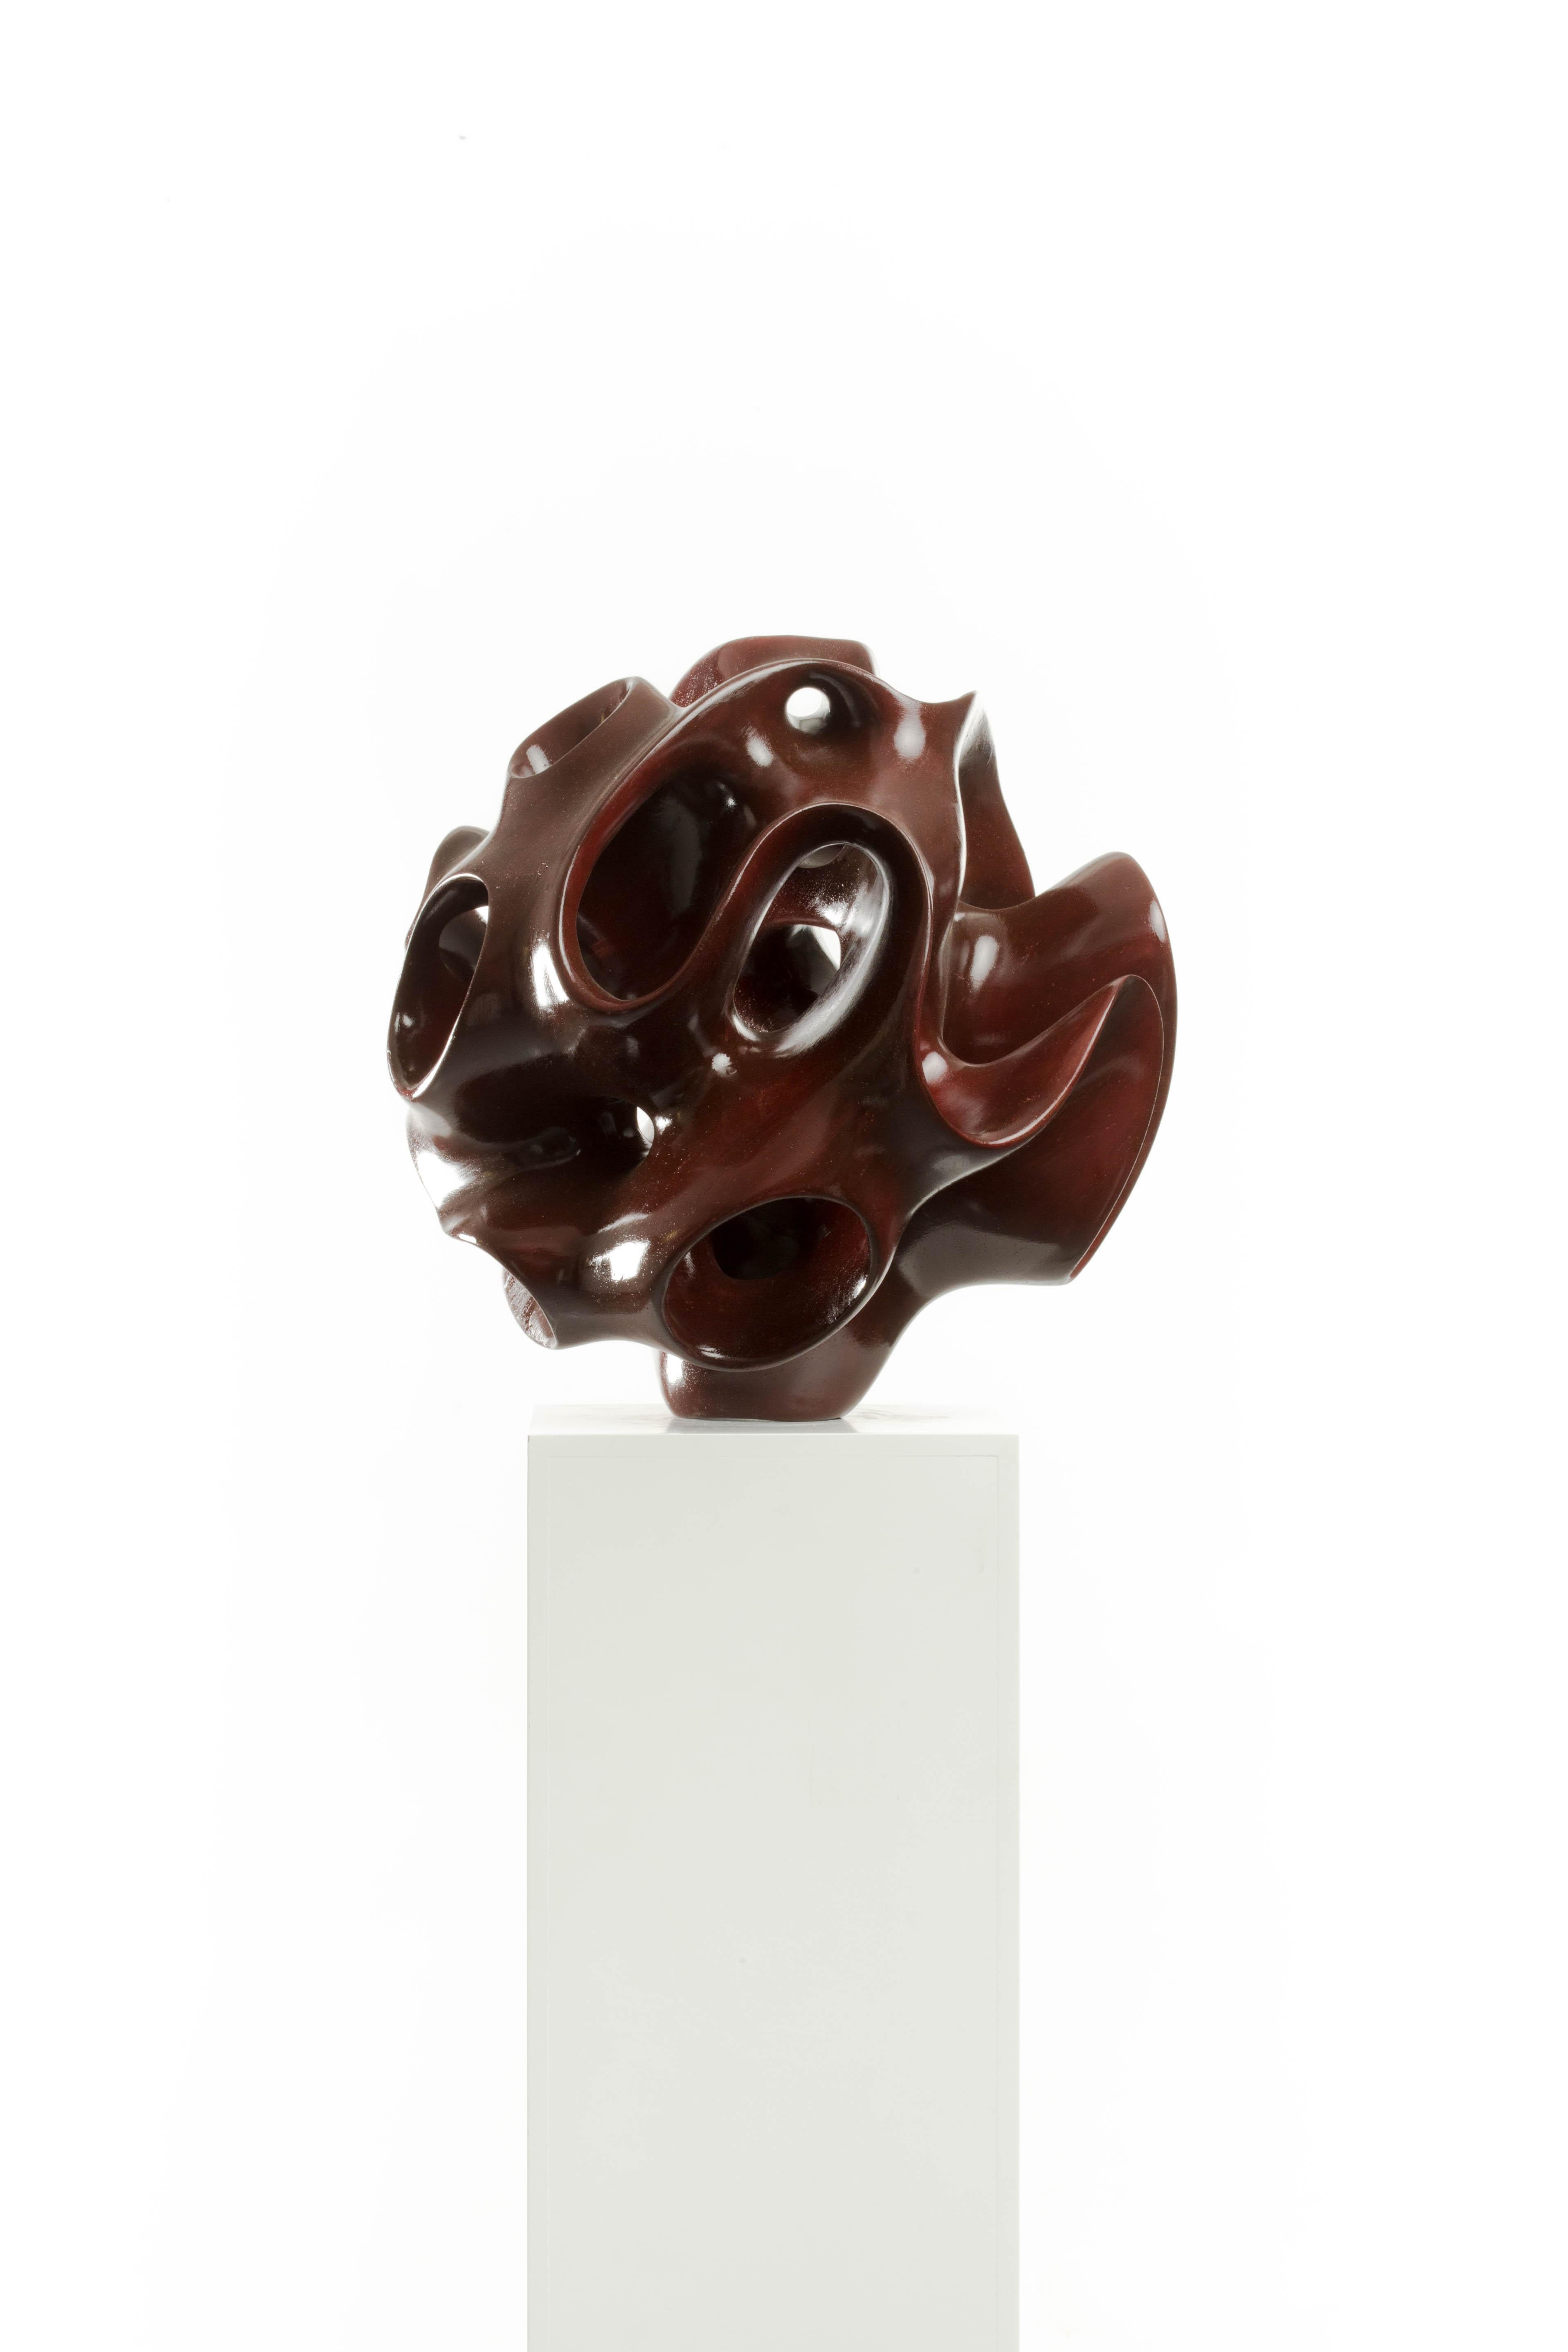 Driaan Claassen Abstract Sculpture - Maroon, Wood, Sphere, Stained, Art, Abstract, Sculpture, Modern, Contemporary